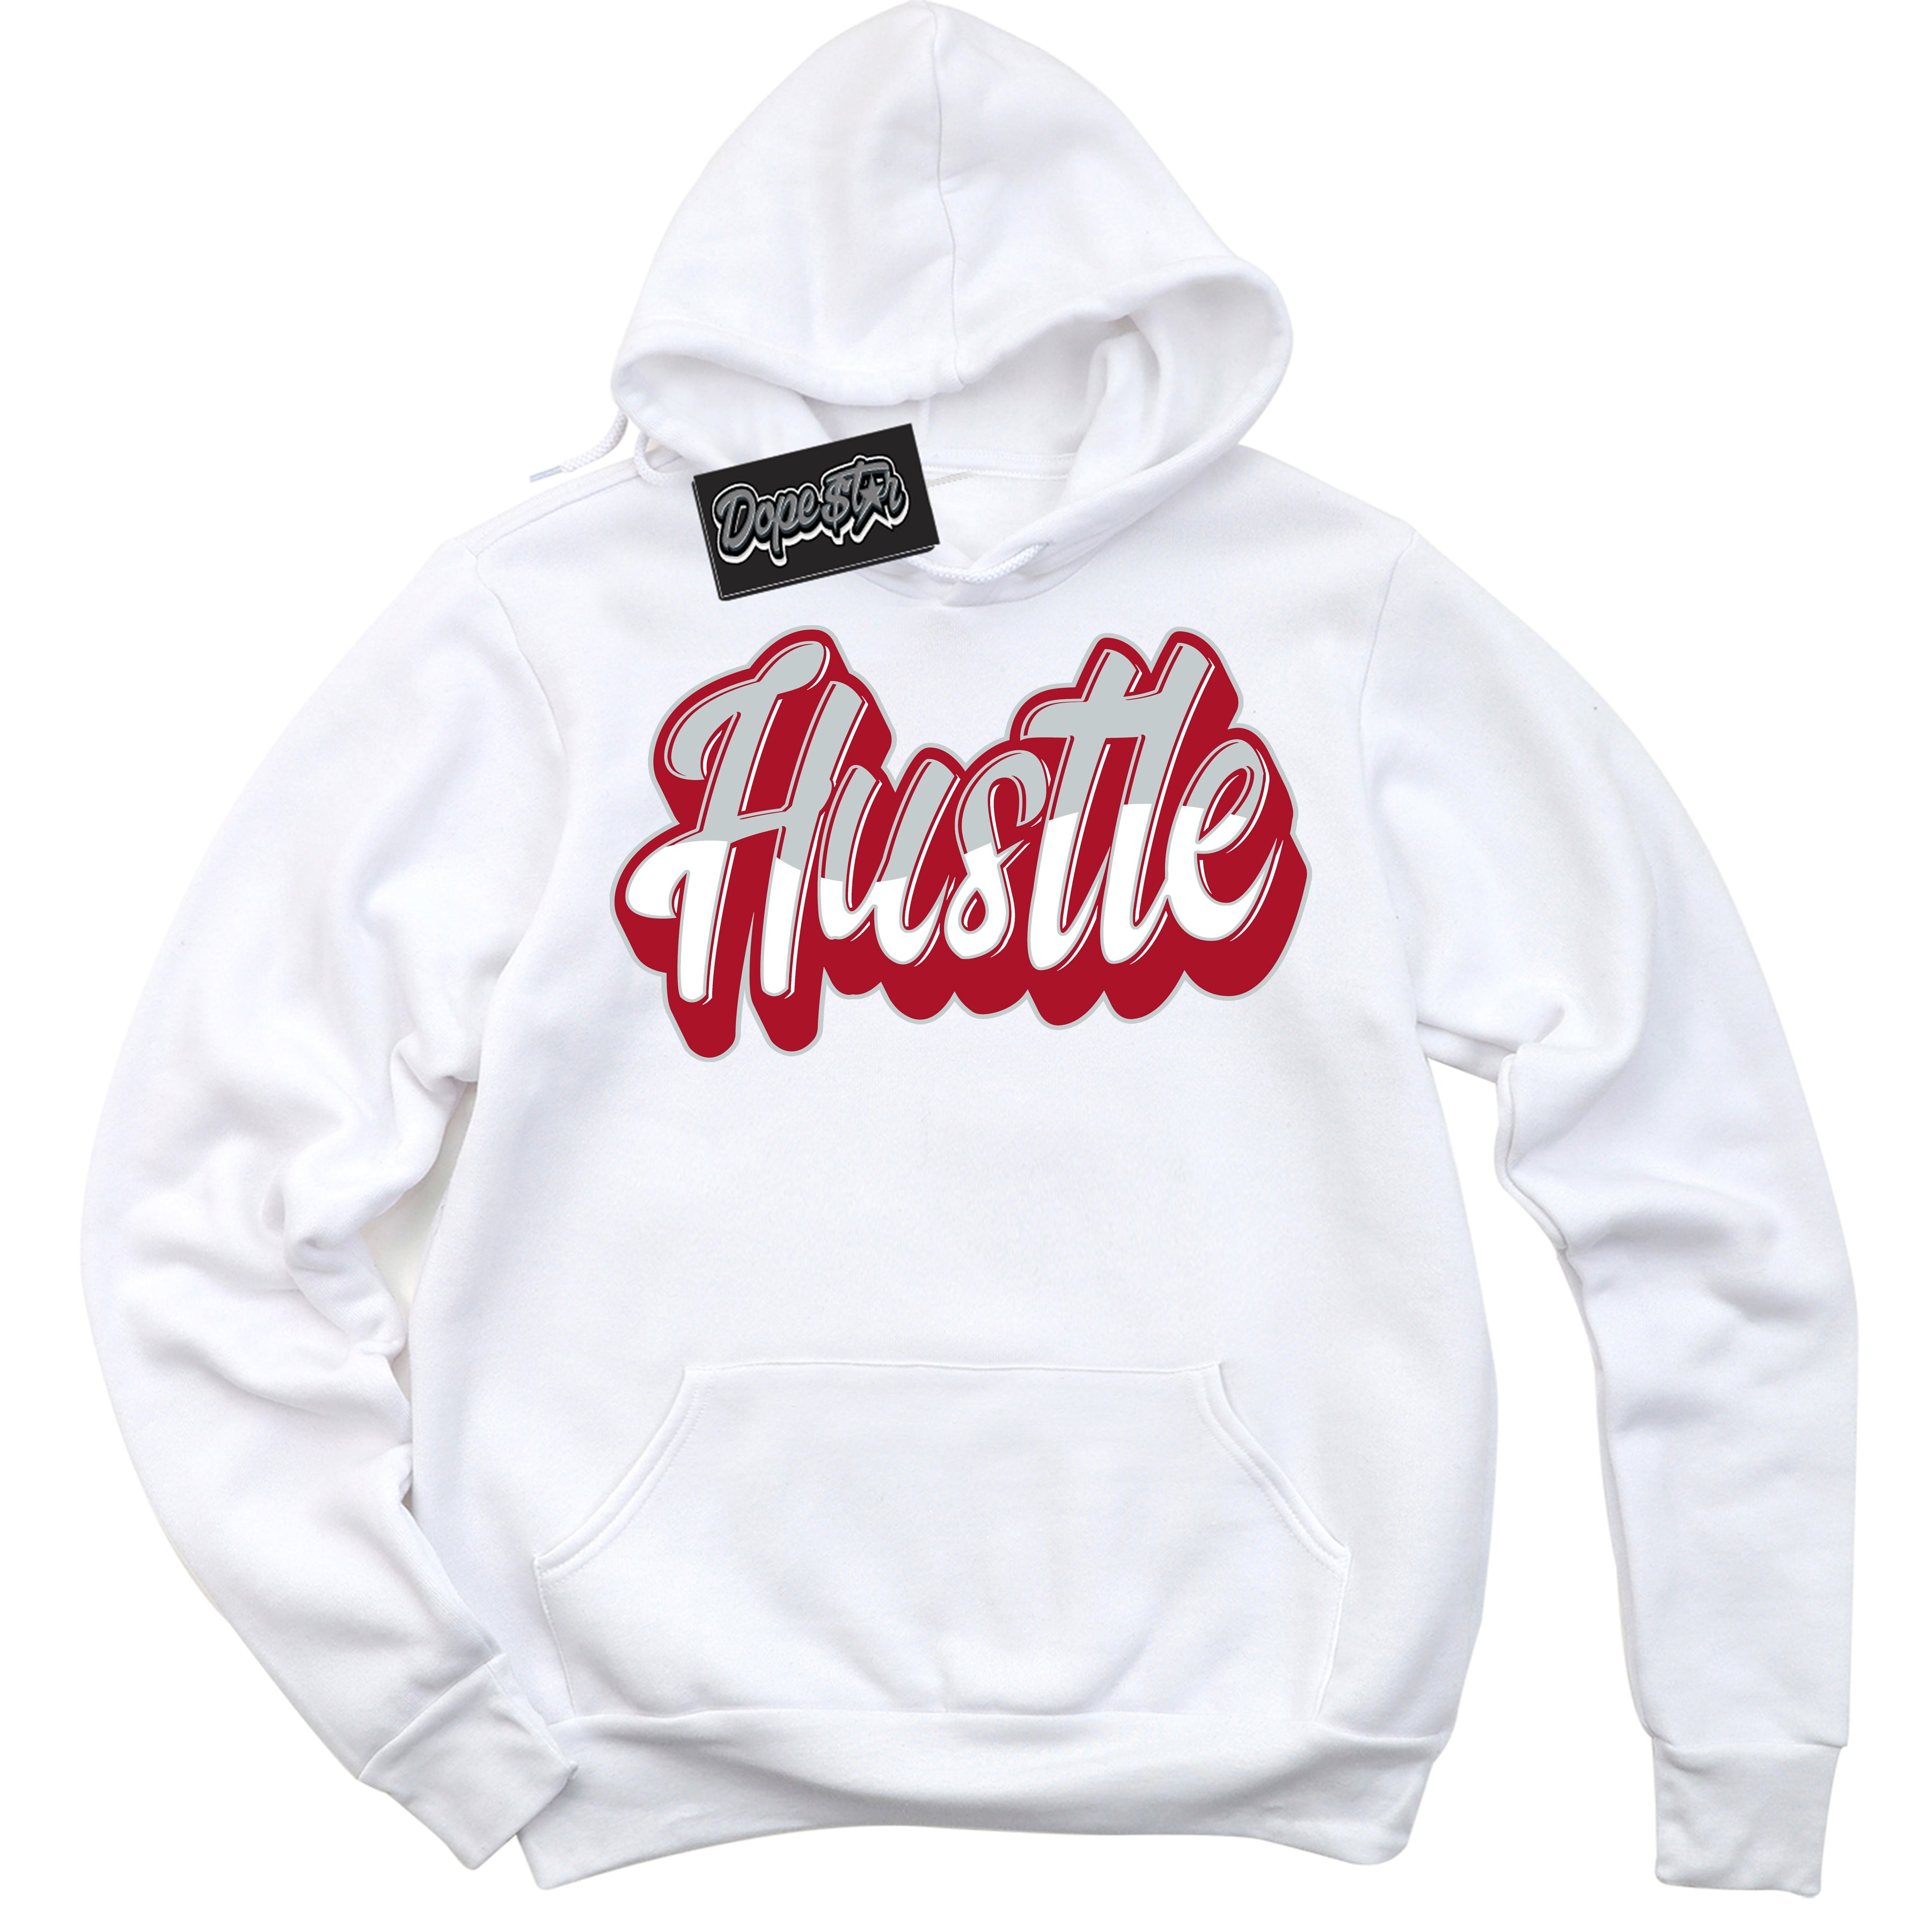 Cool Black Hoodie with “ Hustle ”  design that Perfectly Matches  Reverse Ultraman Sneakers.